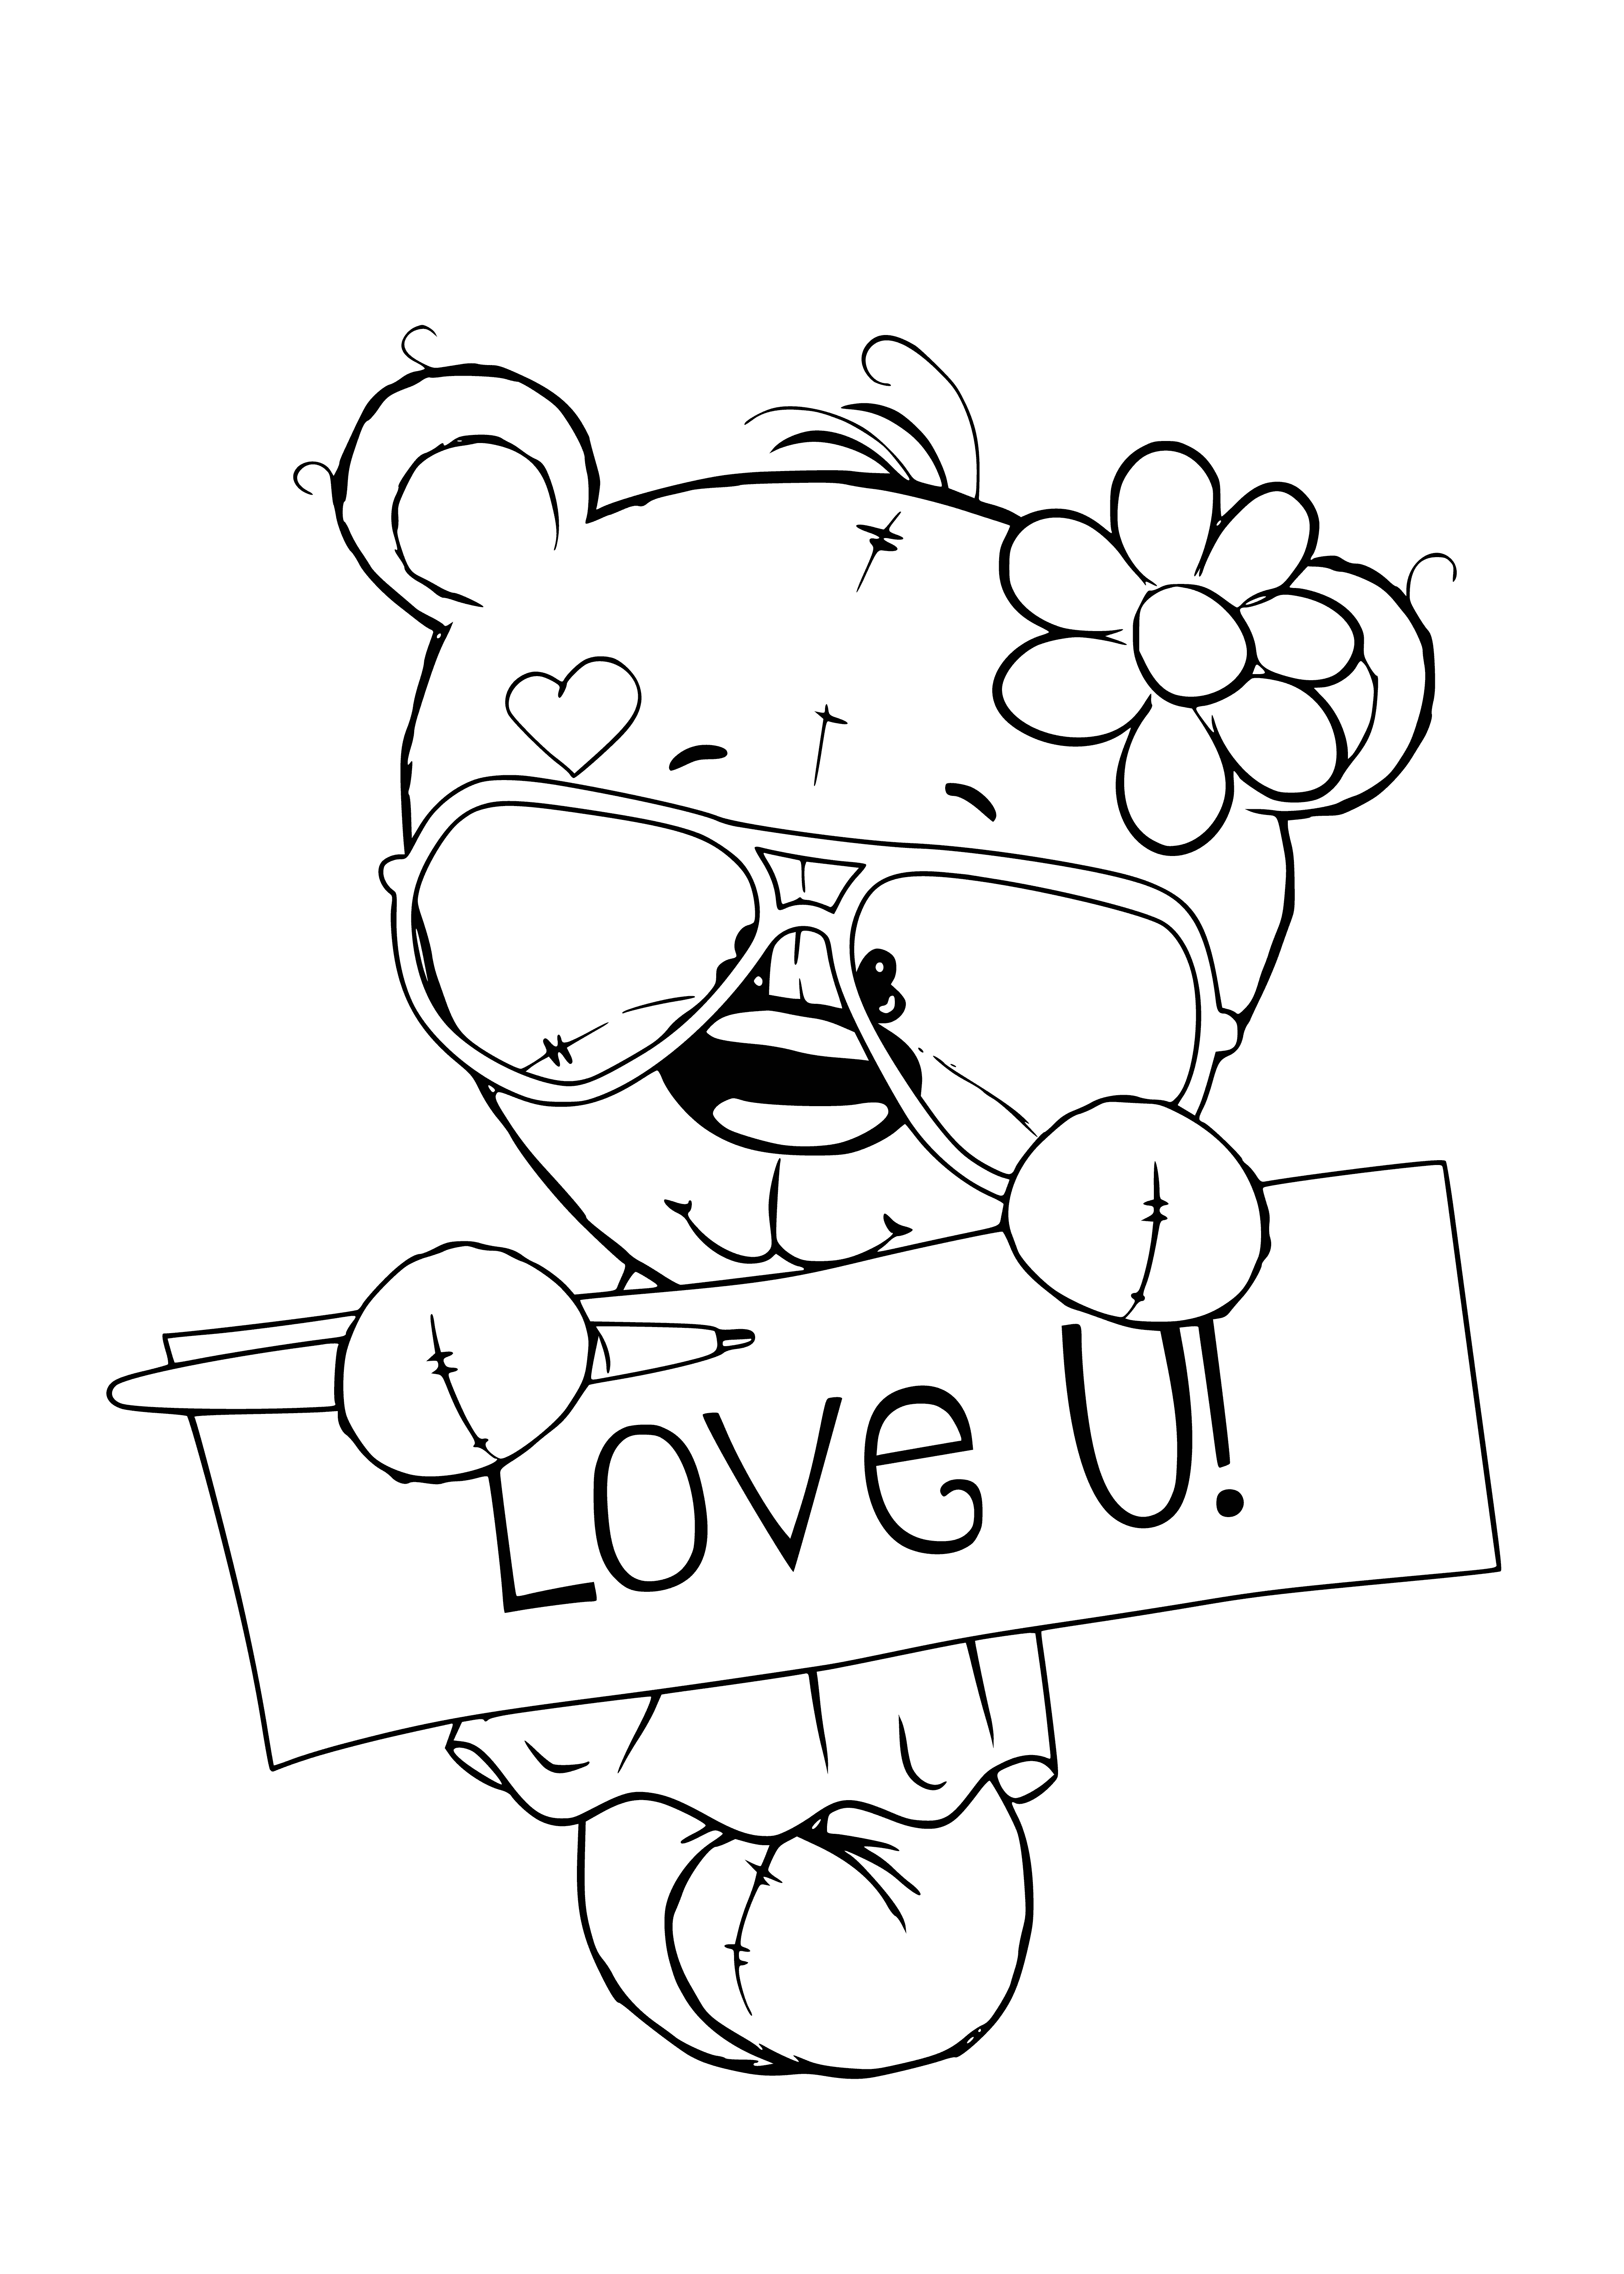 Love you coloring page